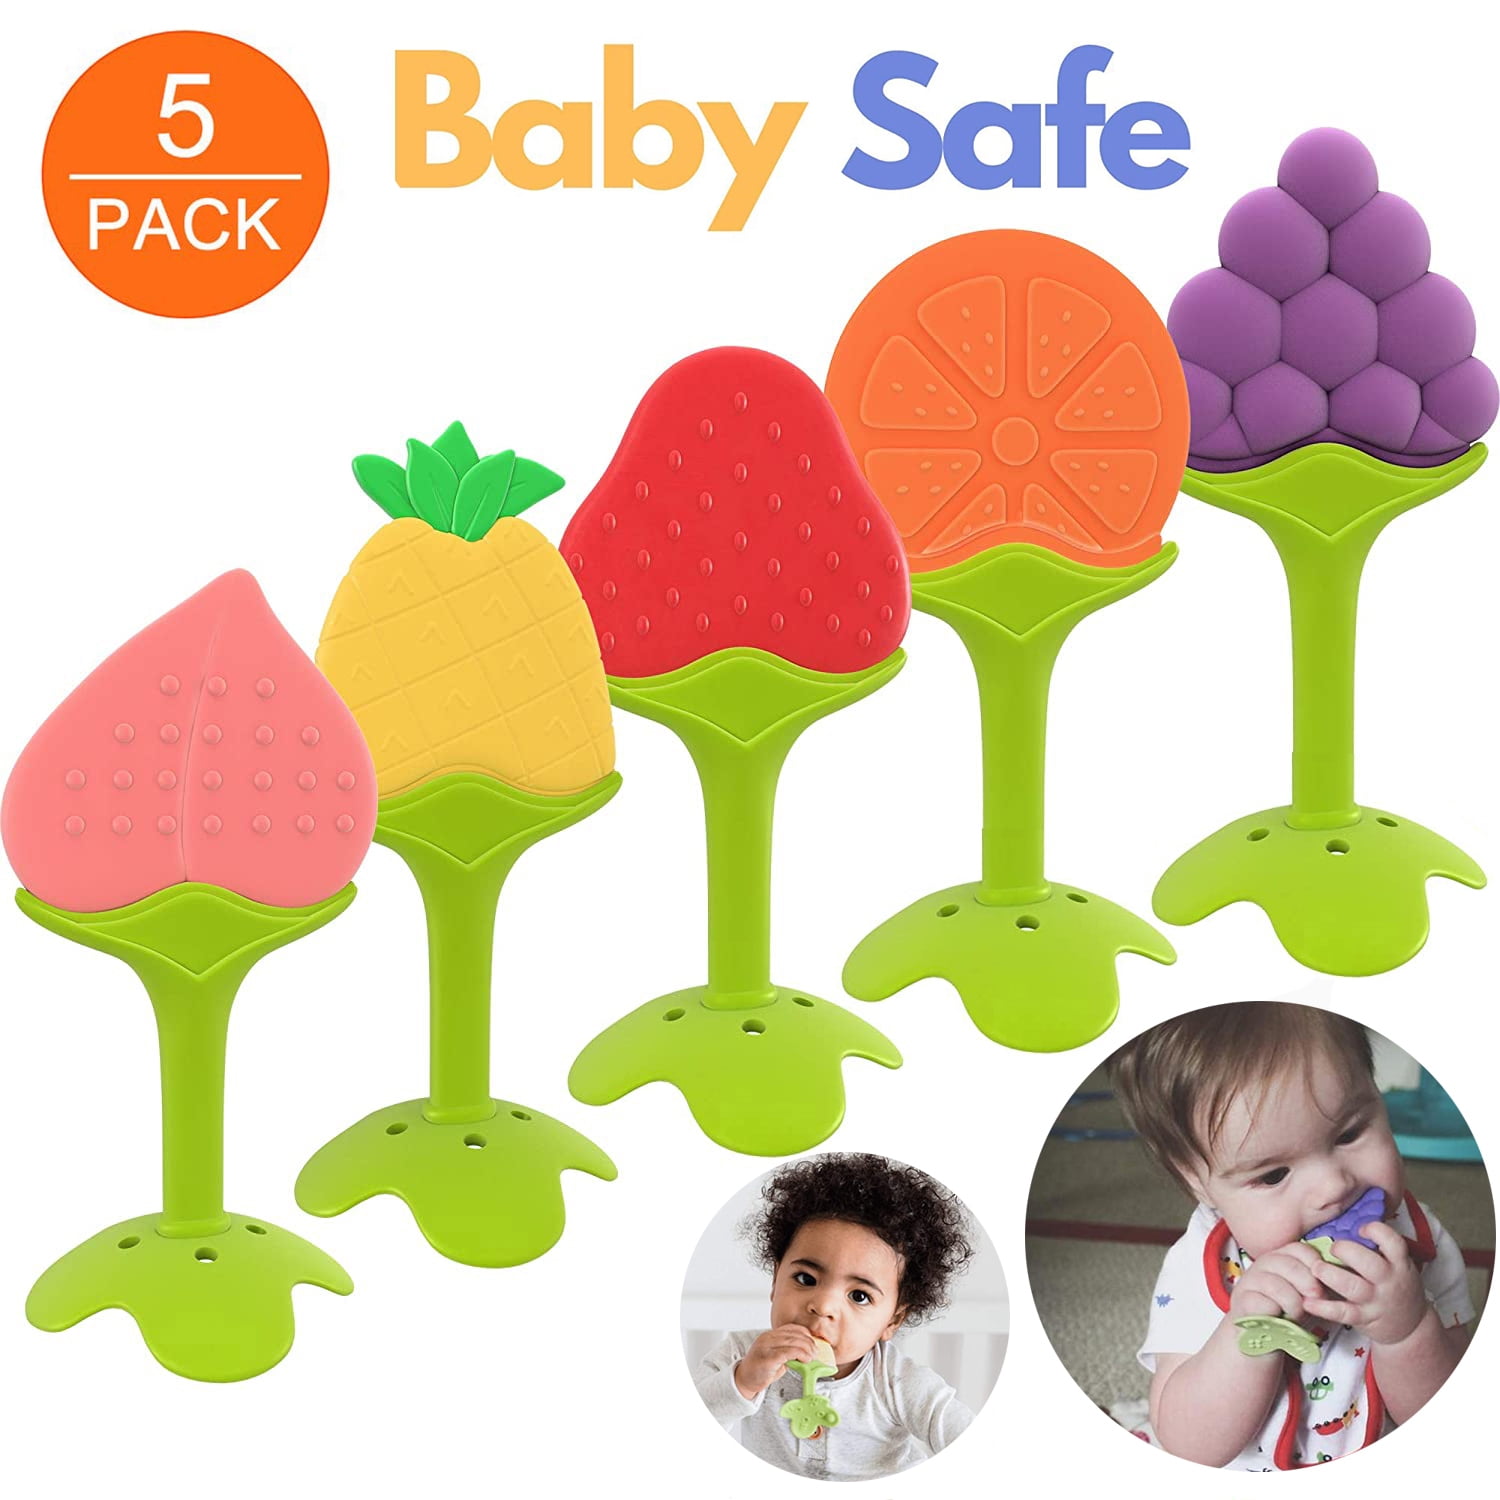 5 Pack Sensory Teether Toy for Babies Gingival Pain Relief Massage Set for Infants and Toddlers Boys and Girls 3M+ Natural Organic Freezer Safe BPA-Free Teething Toys for Baby